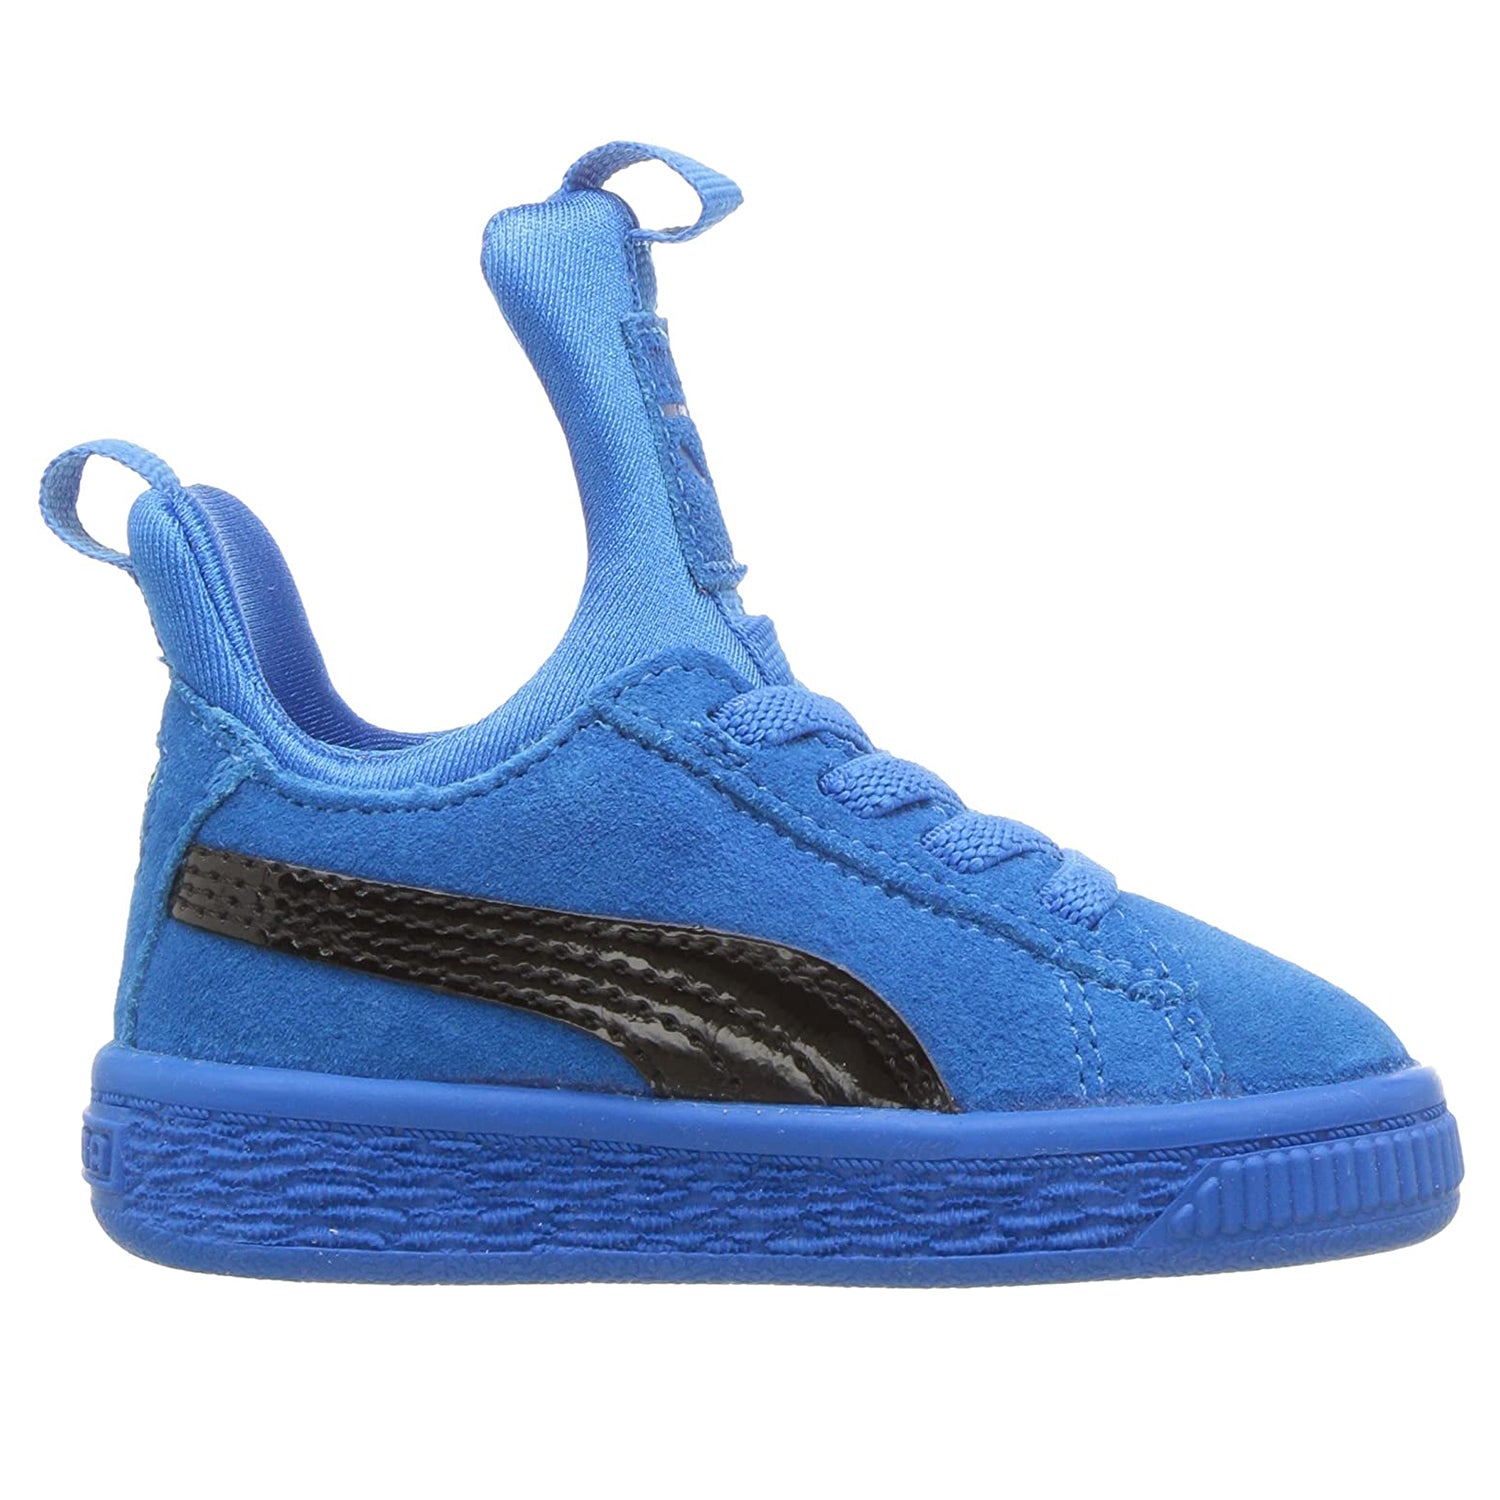 Puma Suede Fierce Patent Block Toddlers Style : 367358